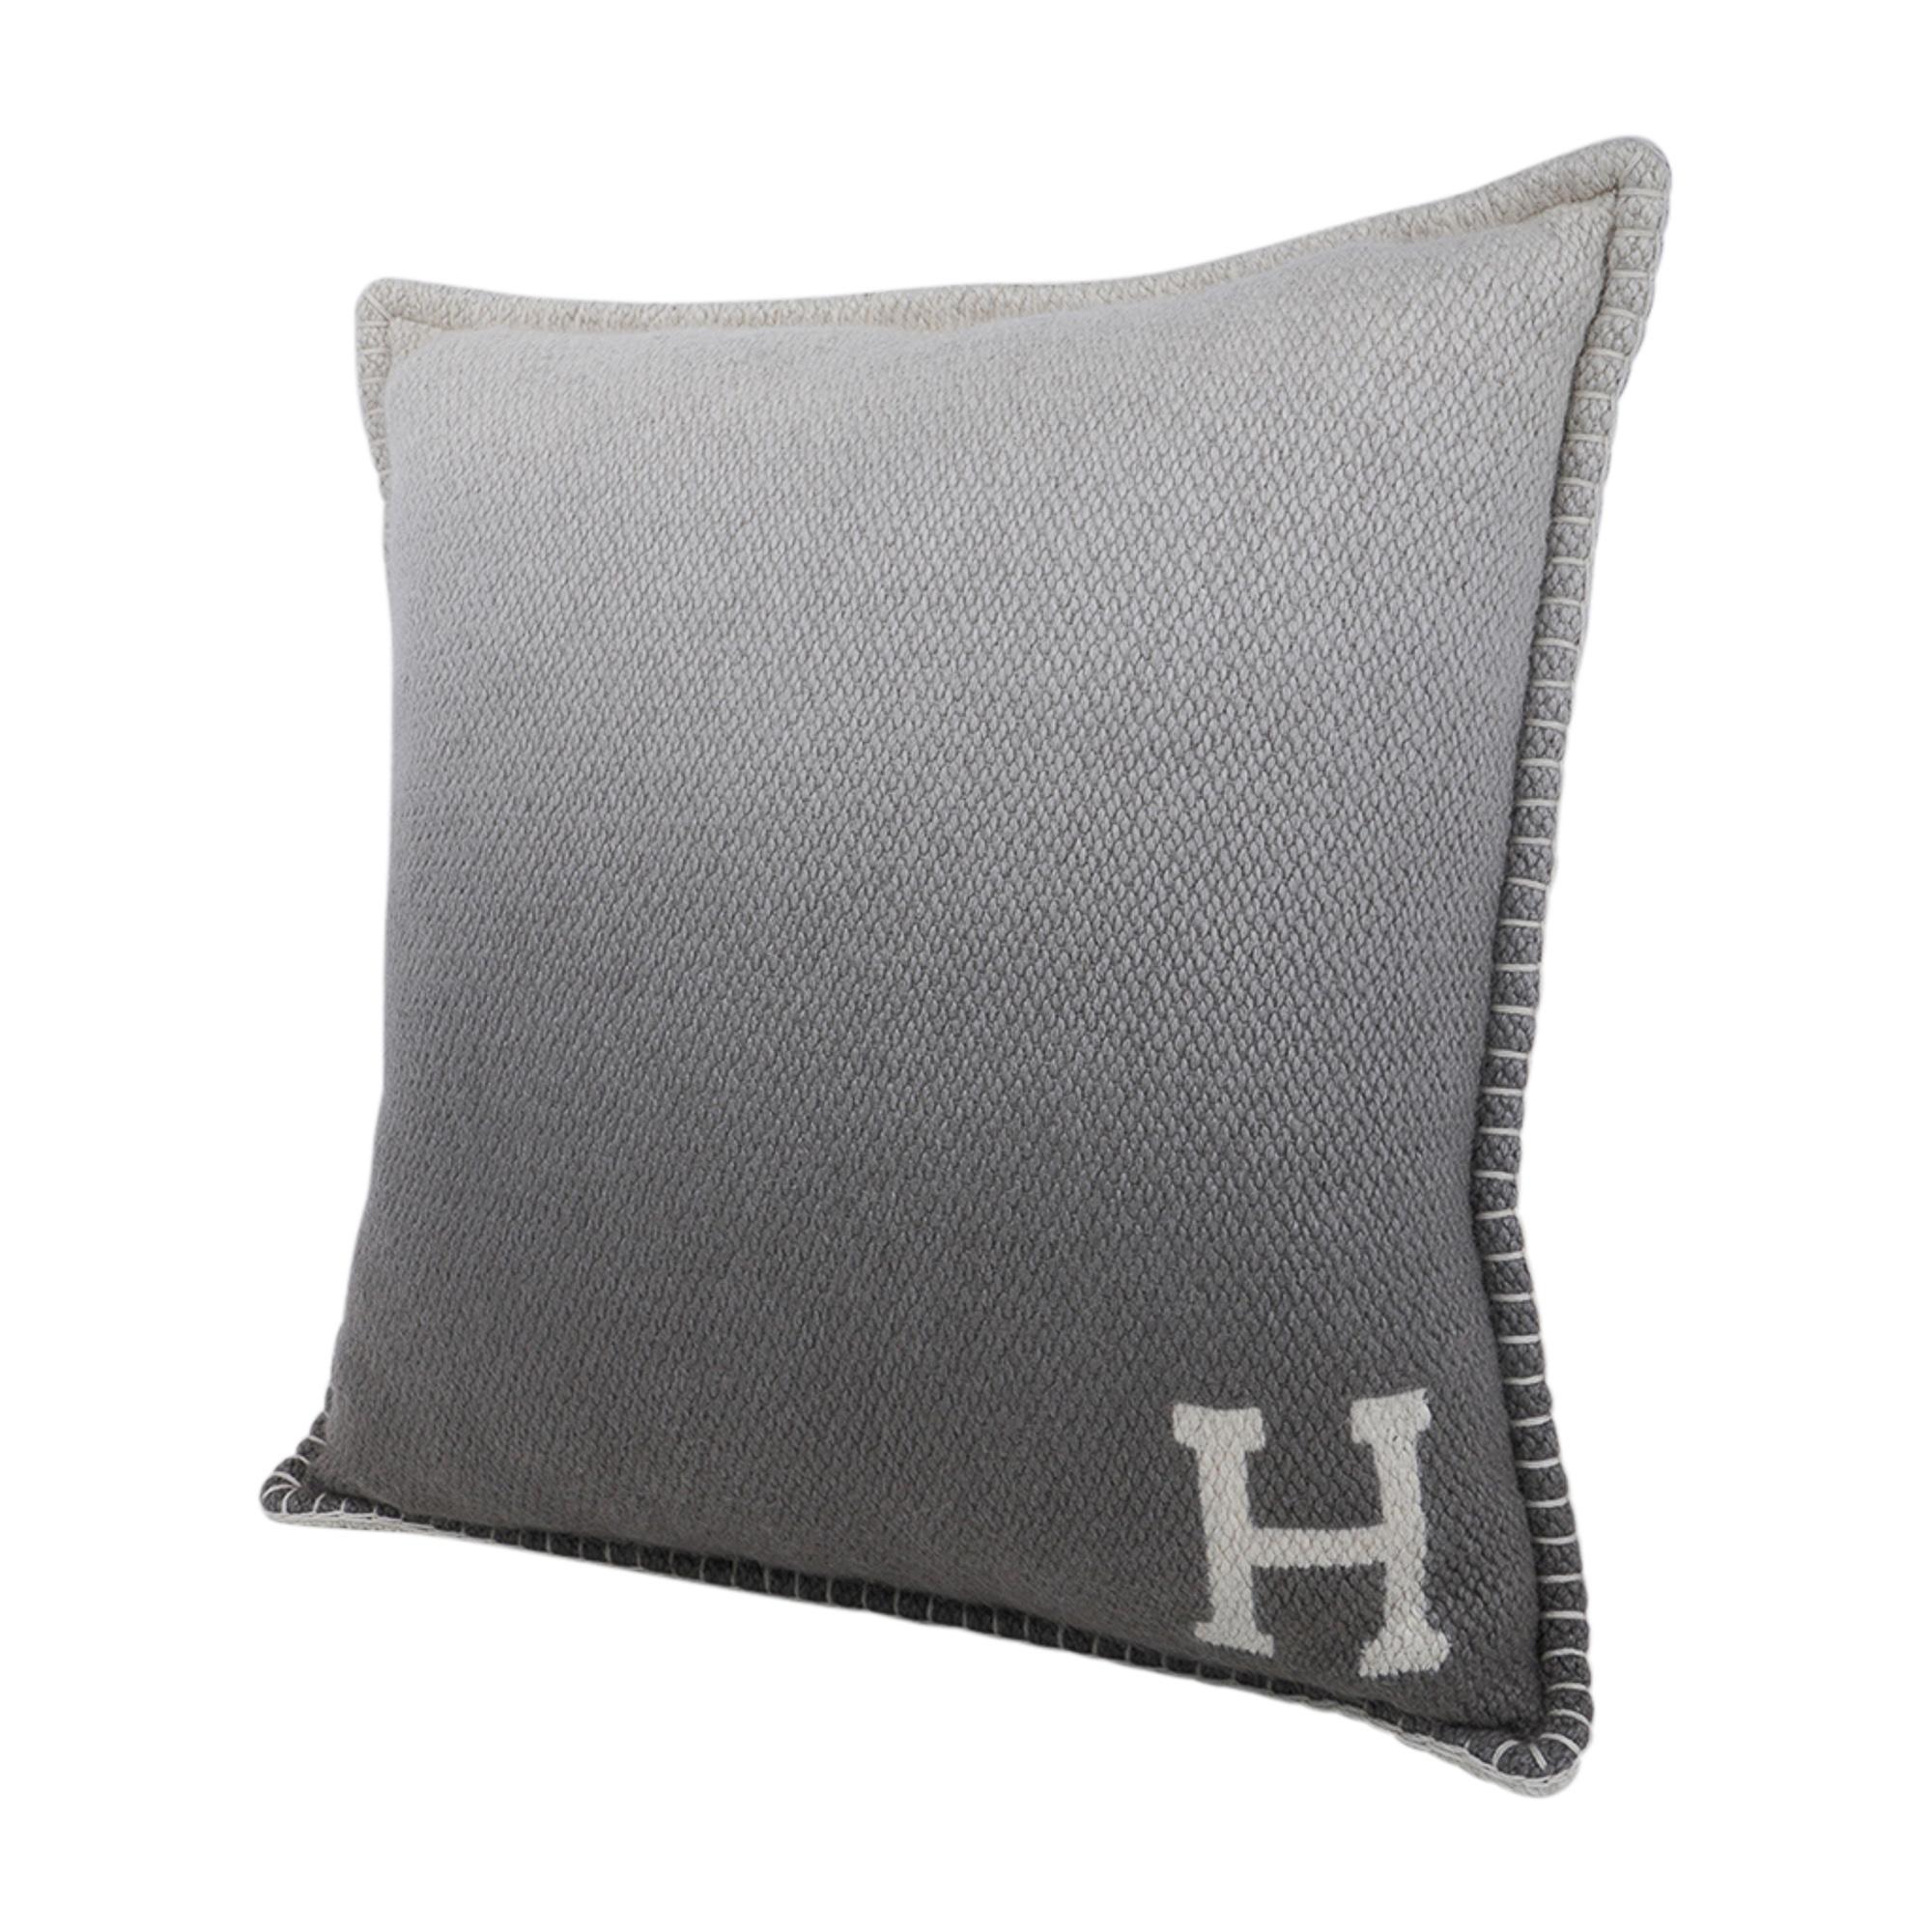 Hermes Yack n' Dye Ombre Pillow Gris / Naturel In New Condition For Sale In Miami, FL